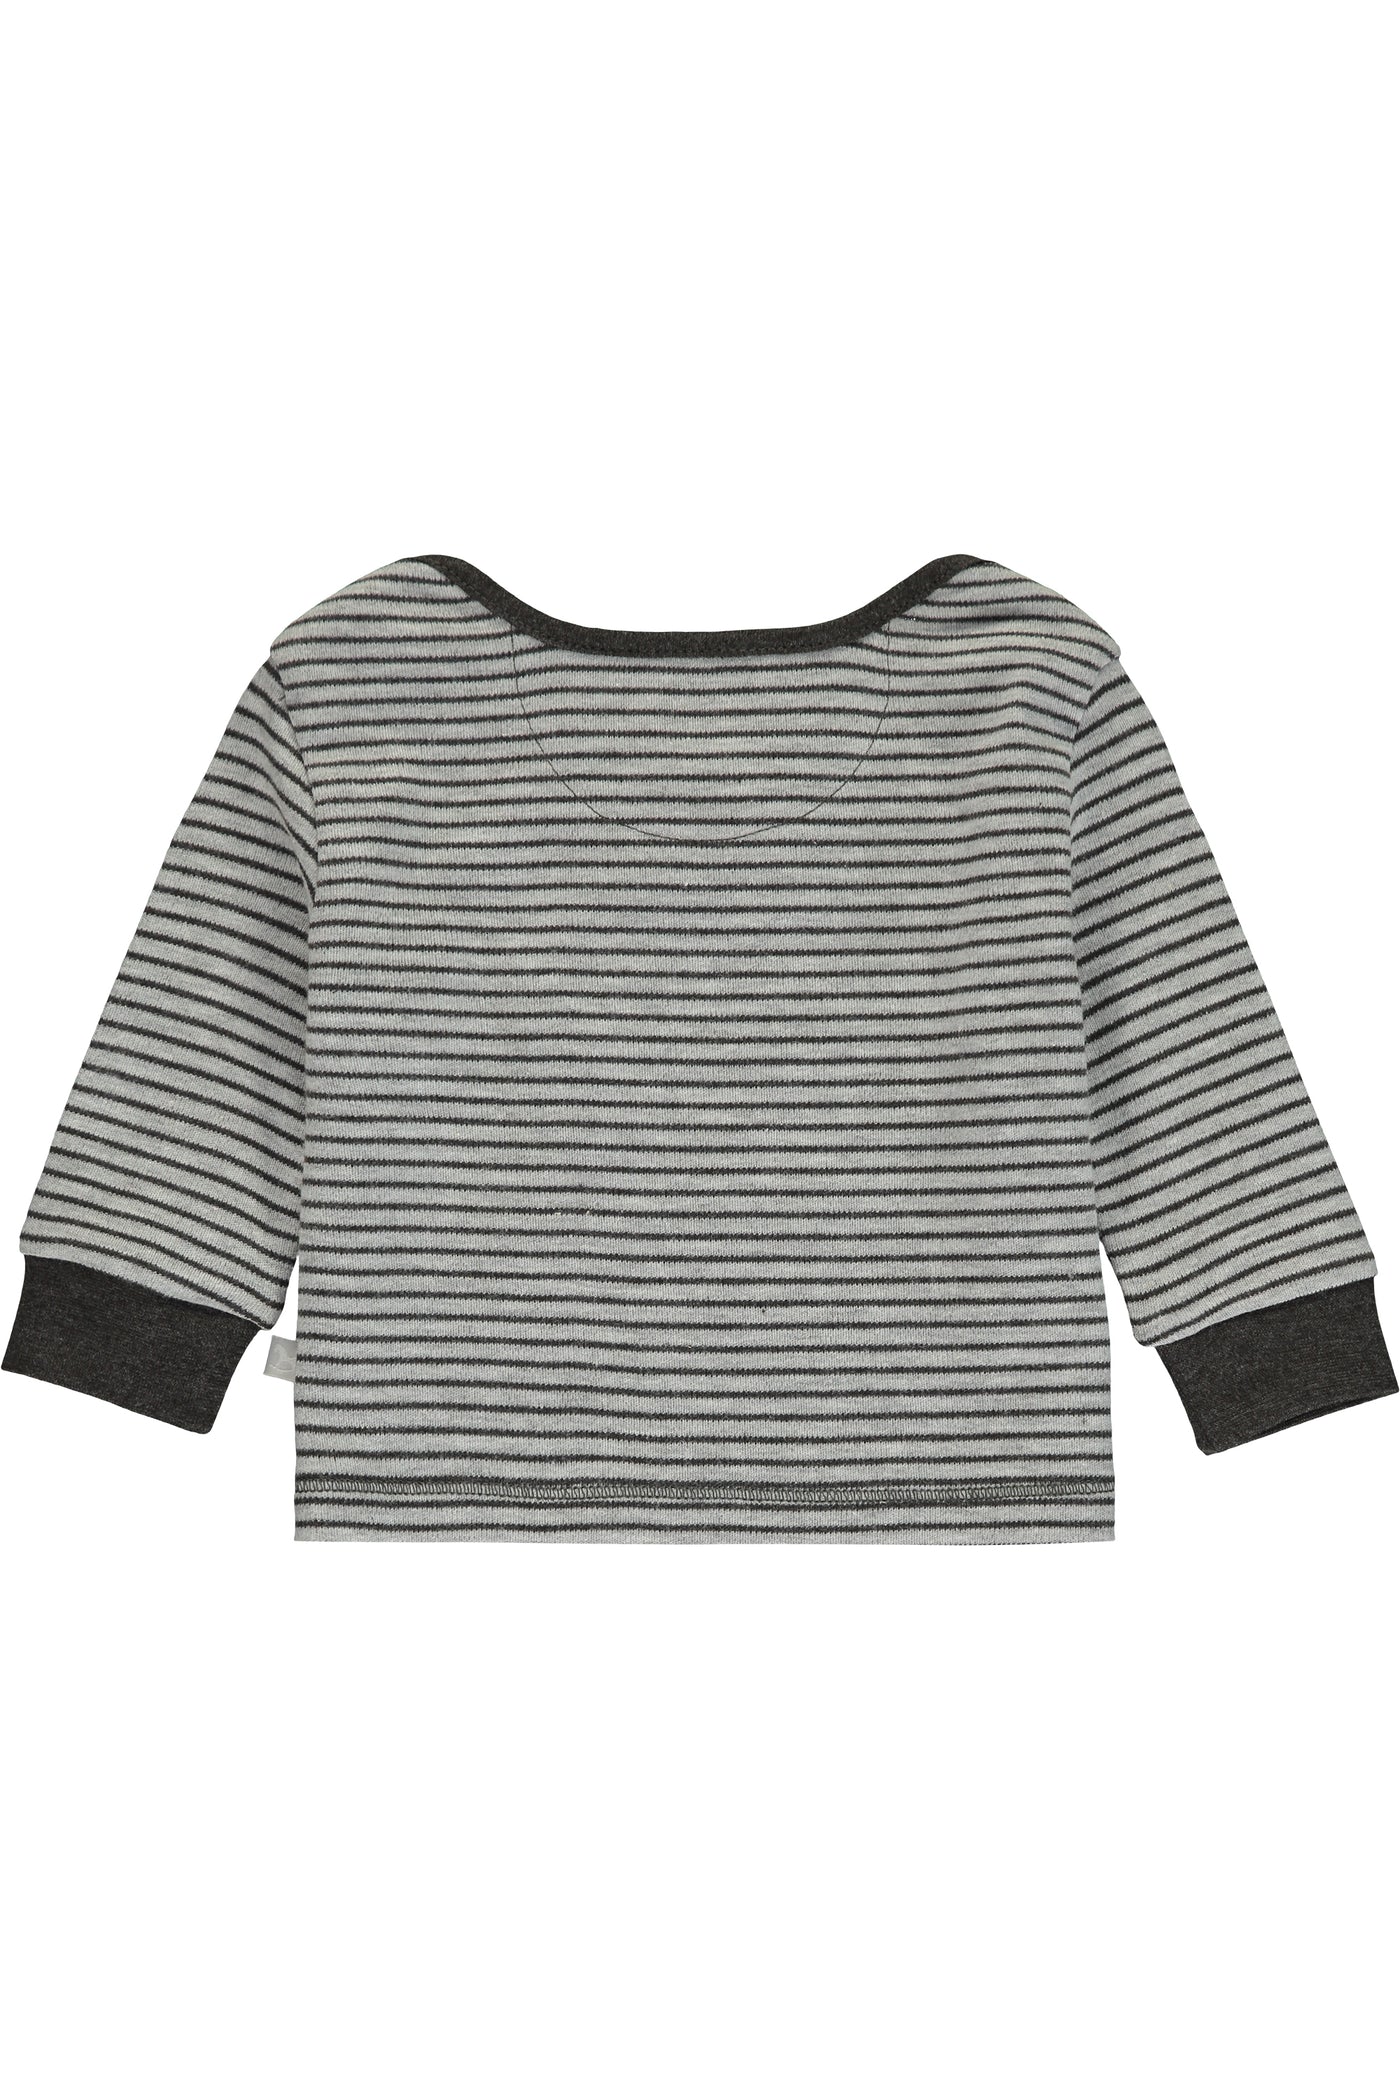 Super Soft Jersey Striped Rocking Horse Top - charcoal and grey marl